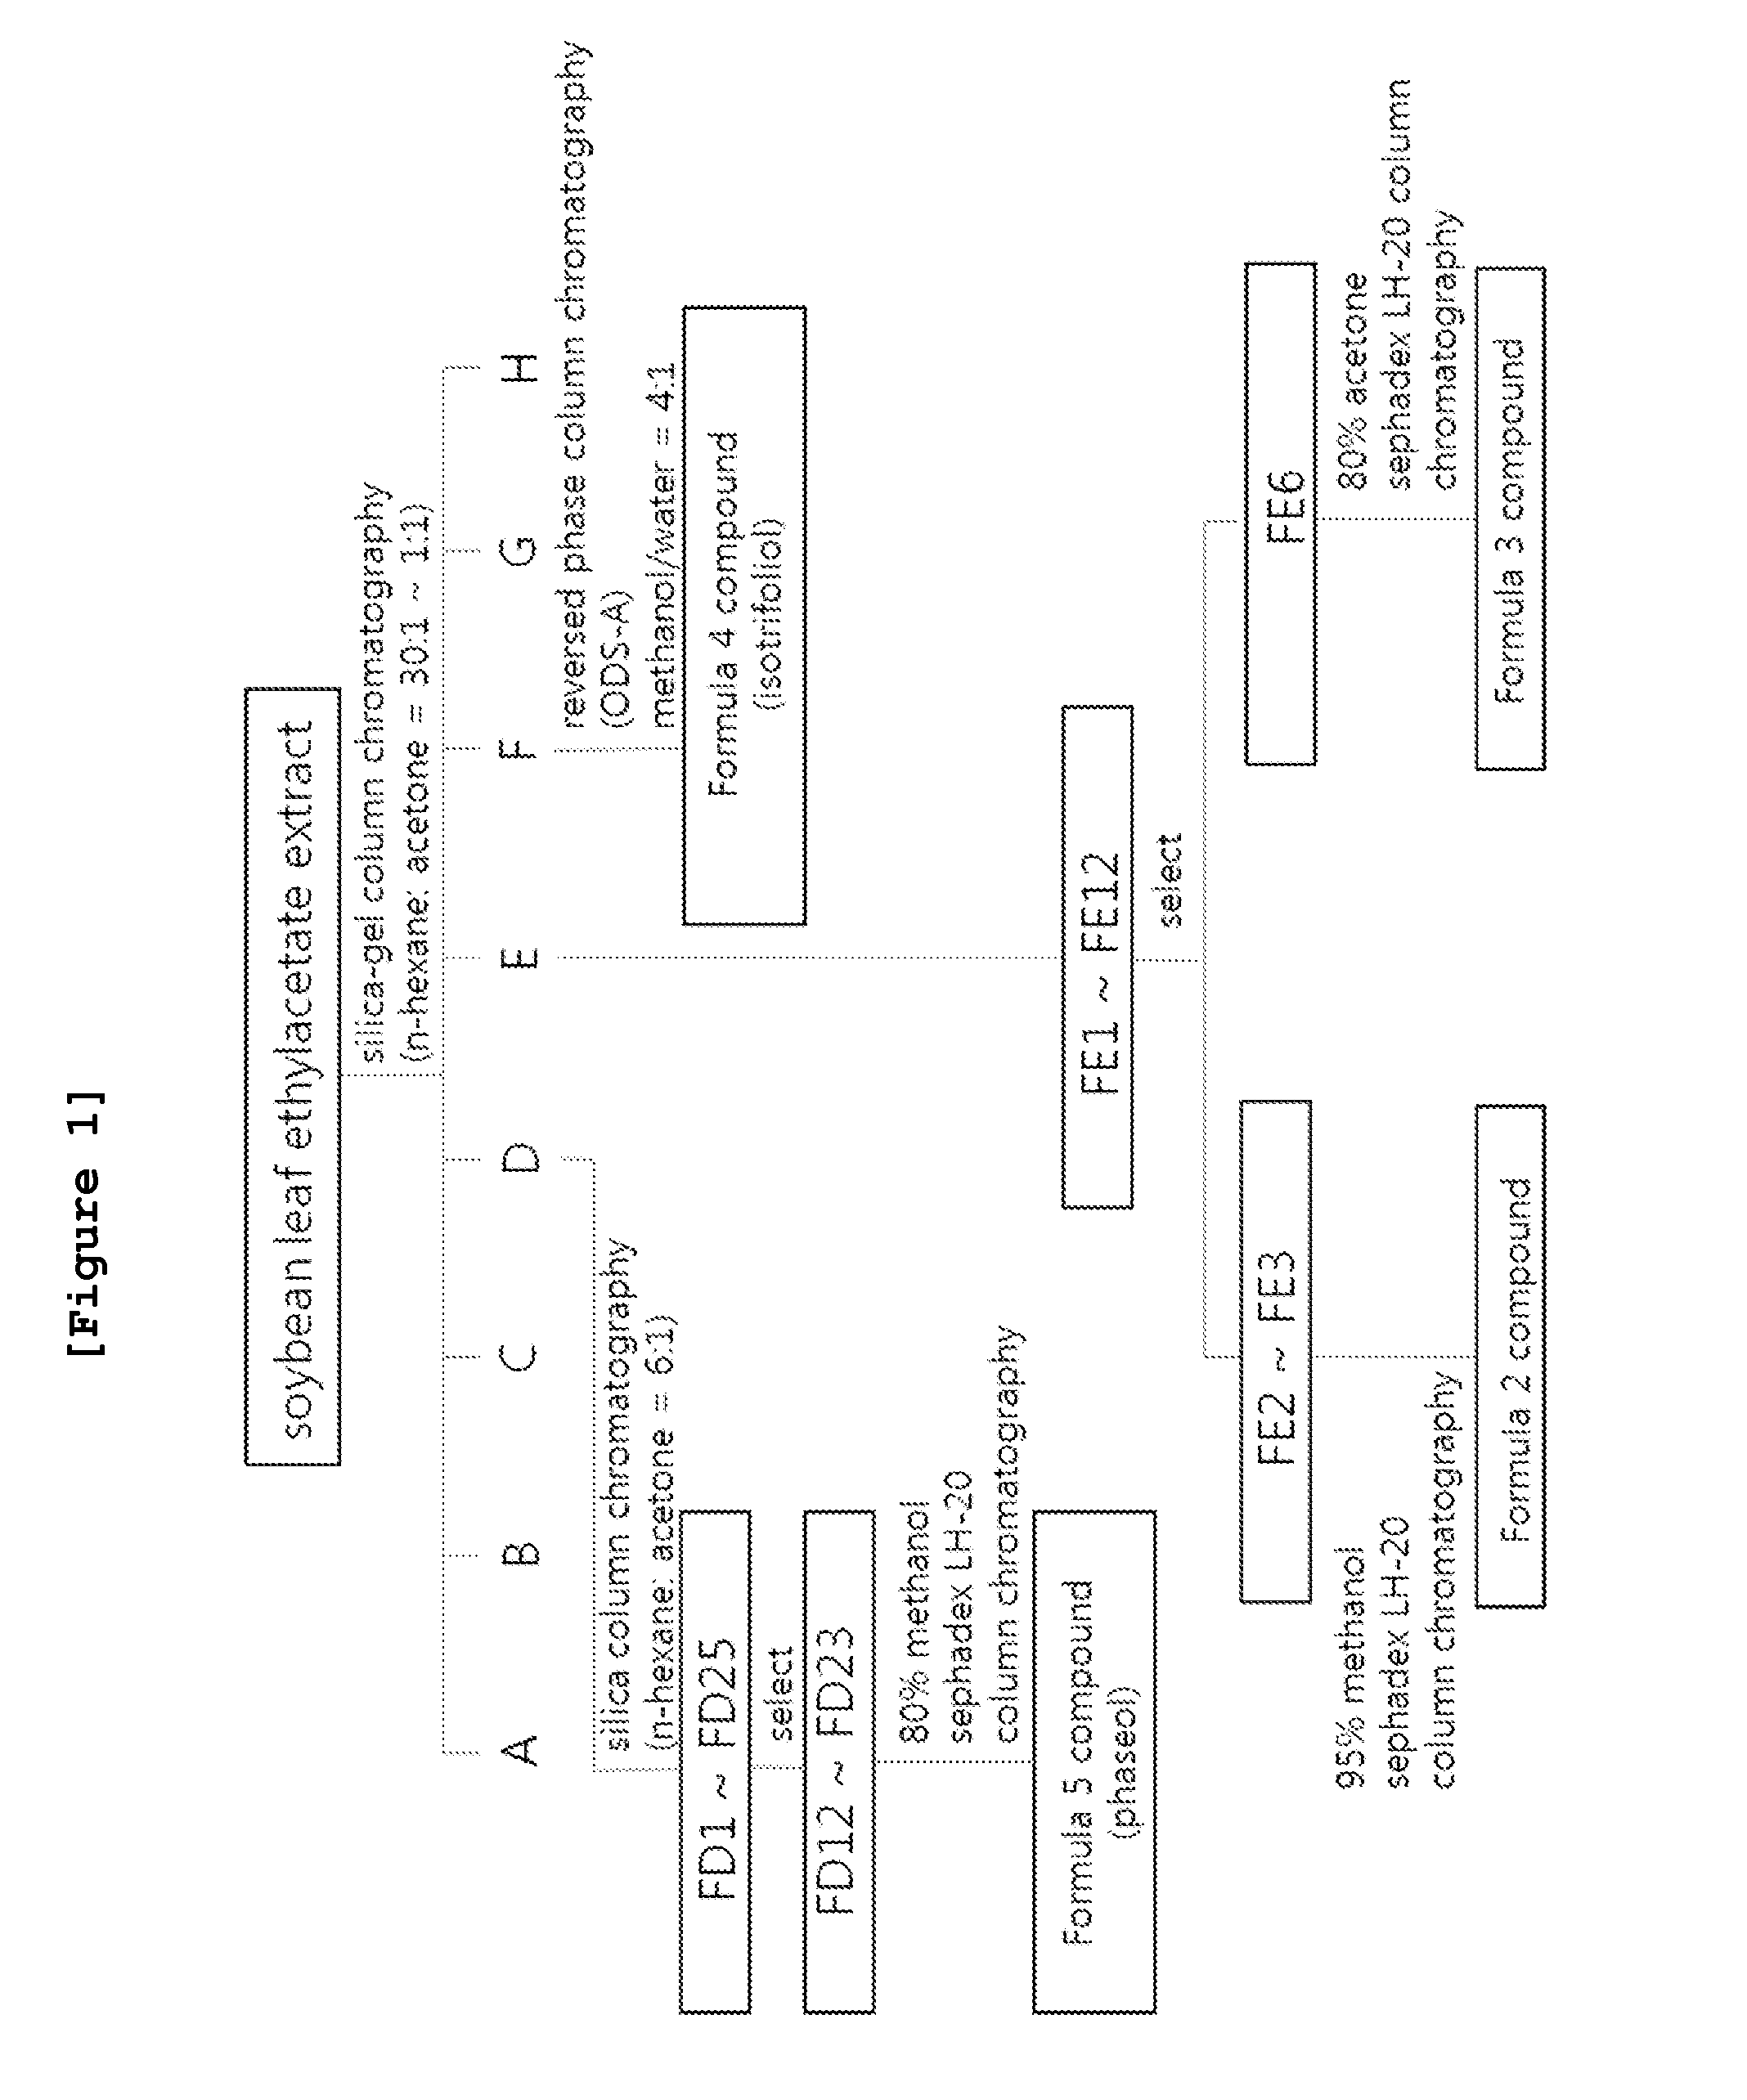 Pterocarpan compound or pharmaceutically acceptable salt thereof and pharmaceutical composition for prevention or treatment of metabolic disease or complication thereof, or for antioxidant containing the same as an active ingredient